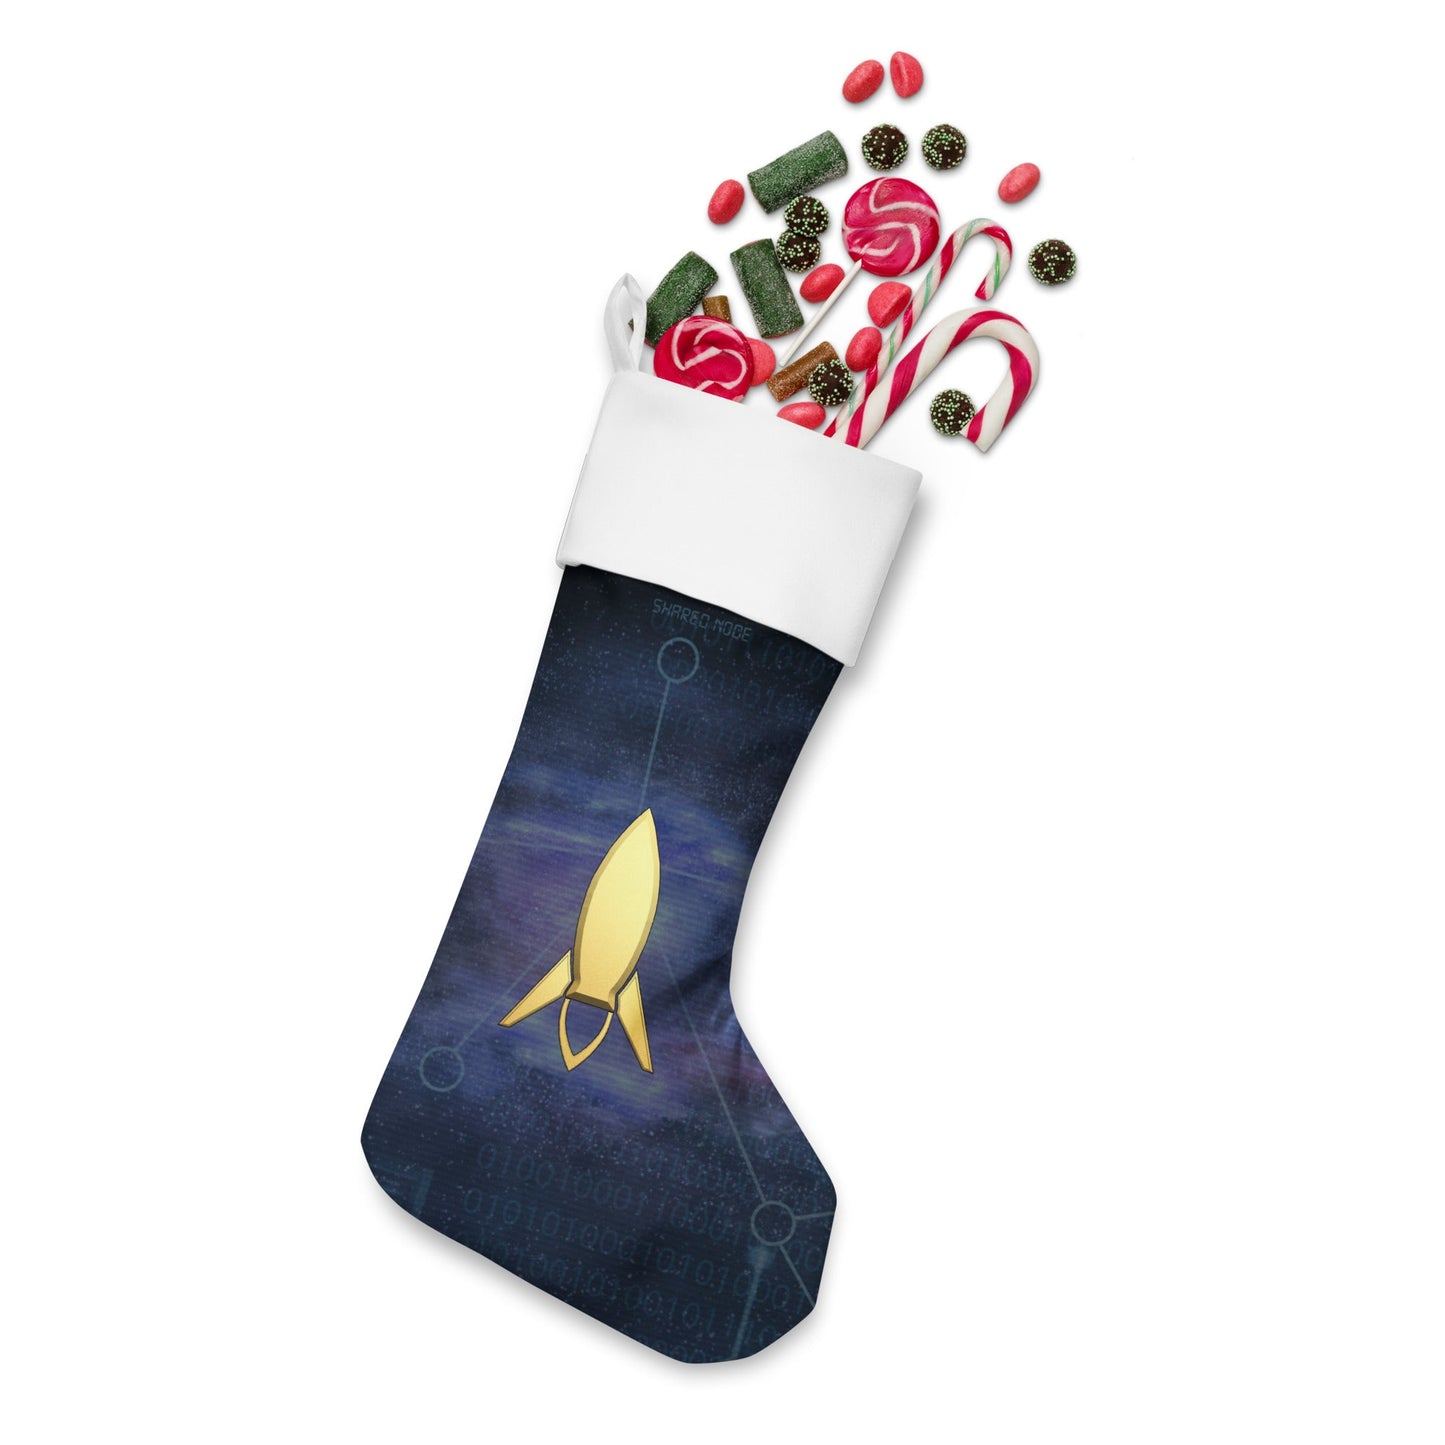 Intergalactic Space Force Christmas Stocking - Your Portal to Galactic Holidays - Spectral Ink Shop -